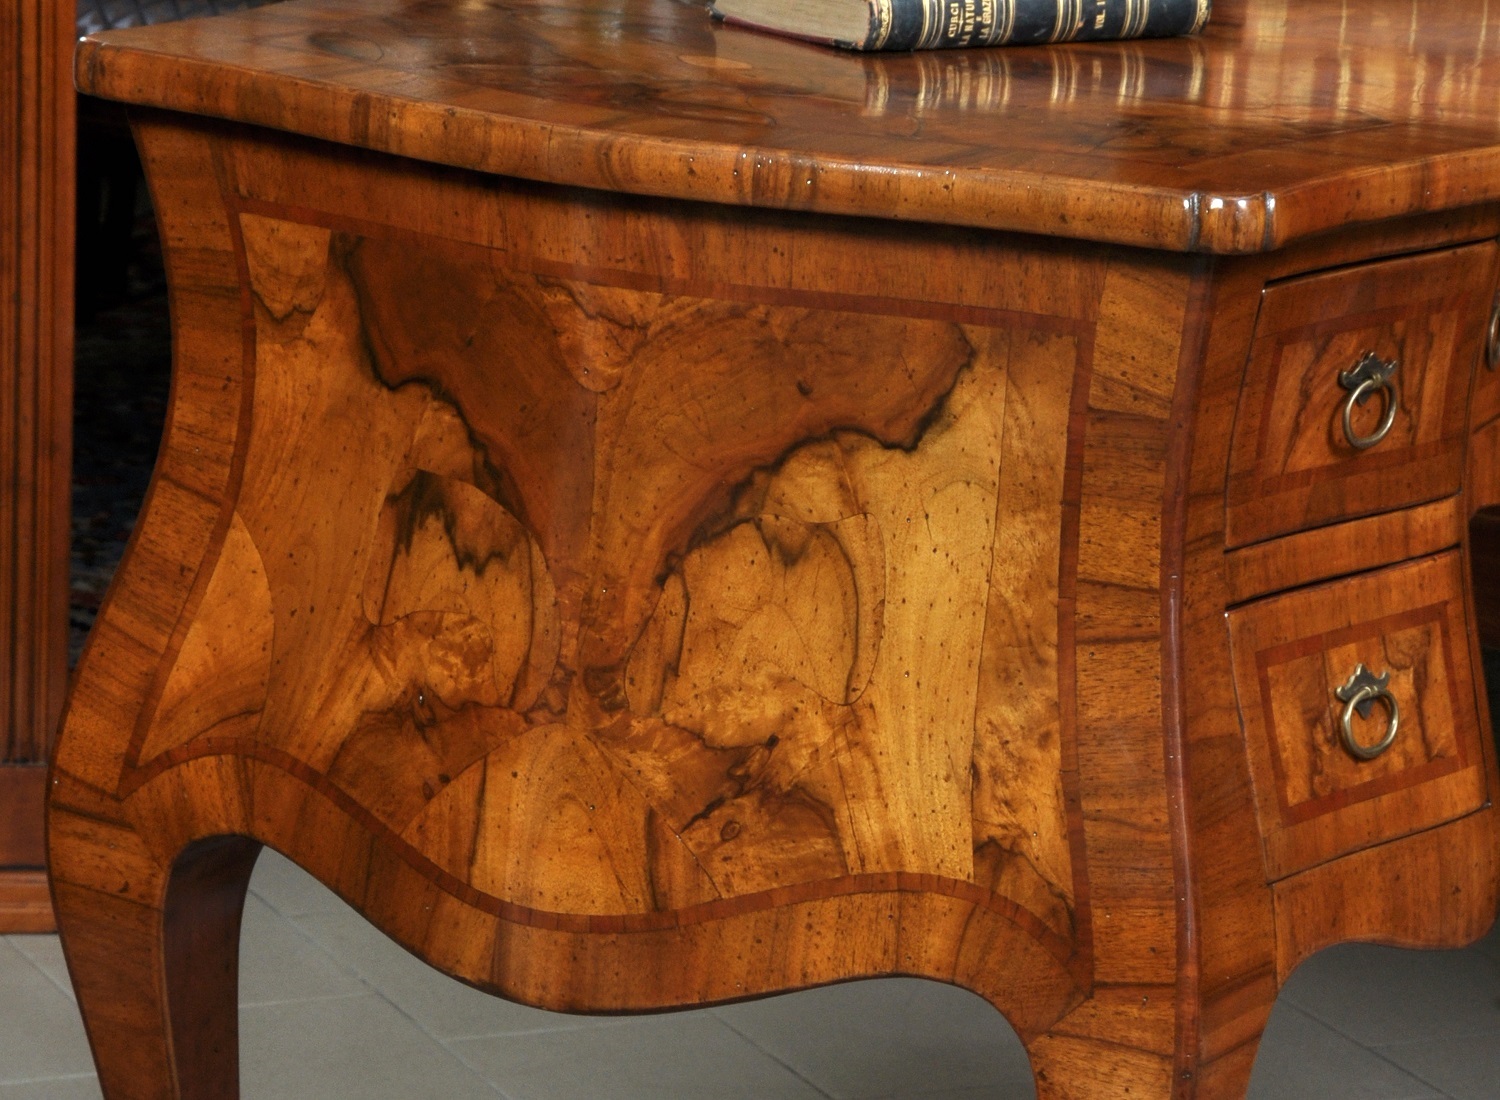 shaping of the rough side and inlaid in walnut and burl and bois de rose fine workmanship made in Italy desk of the eighteenth century Venetian baroque produced in the laboratory of luxury brad Vangelista